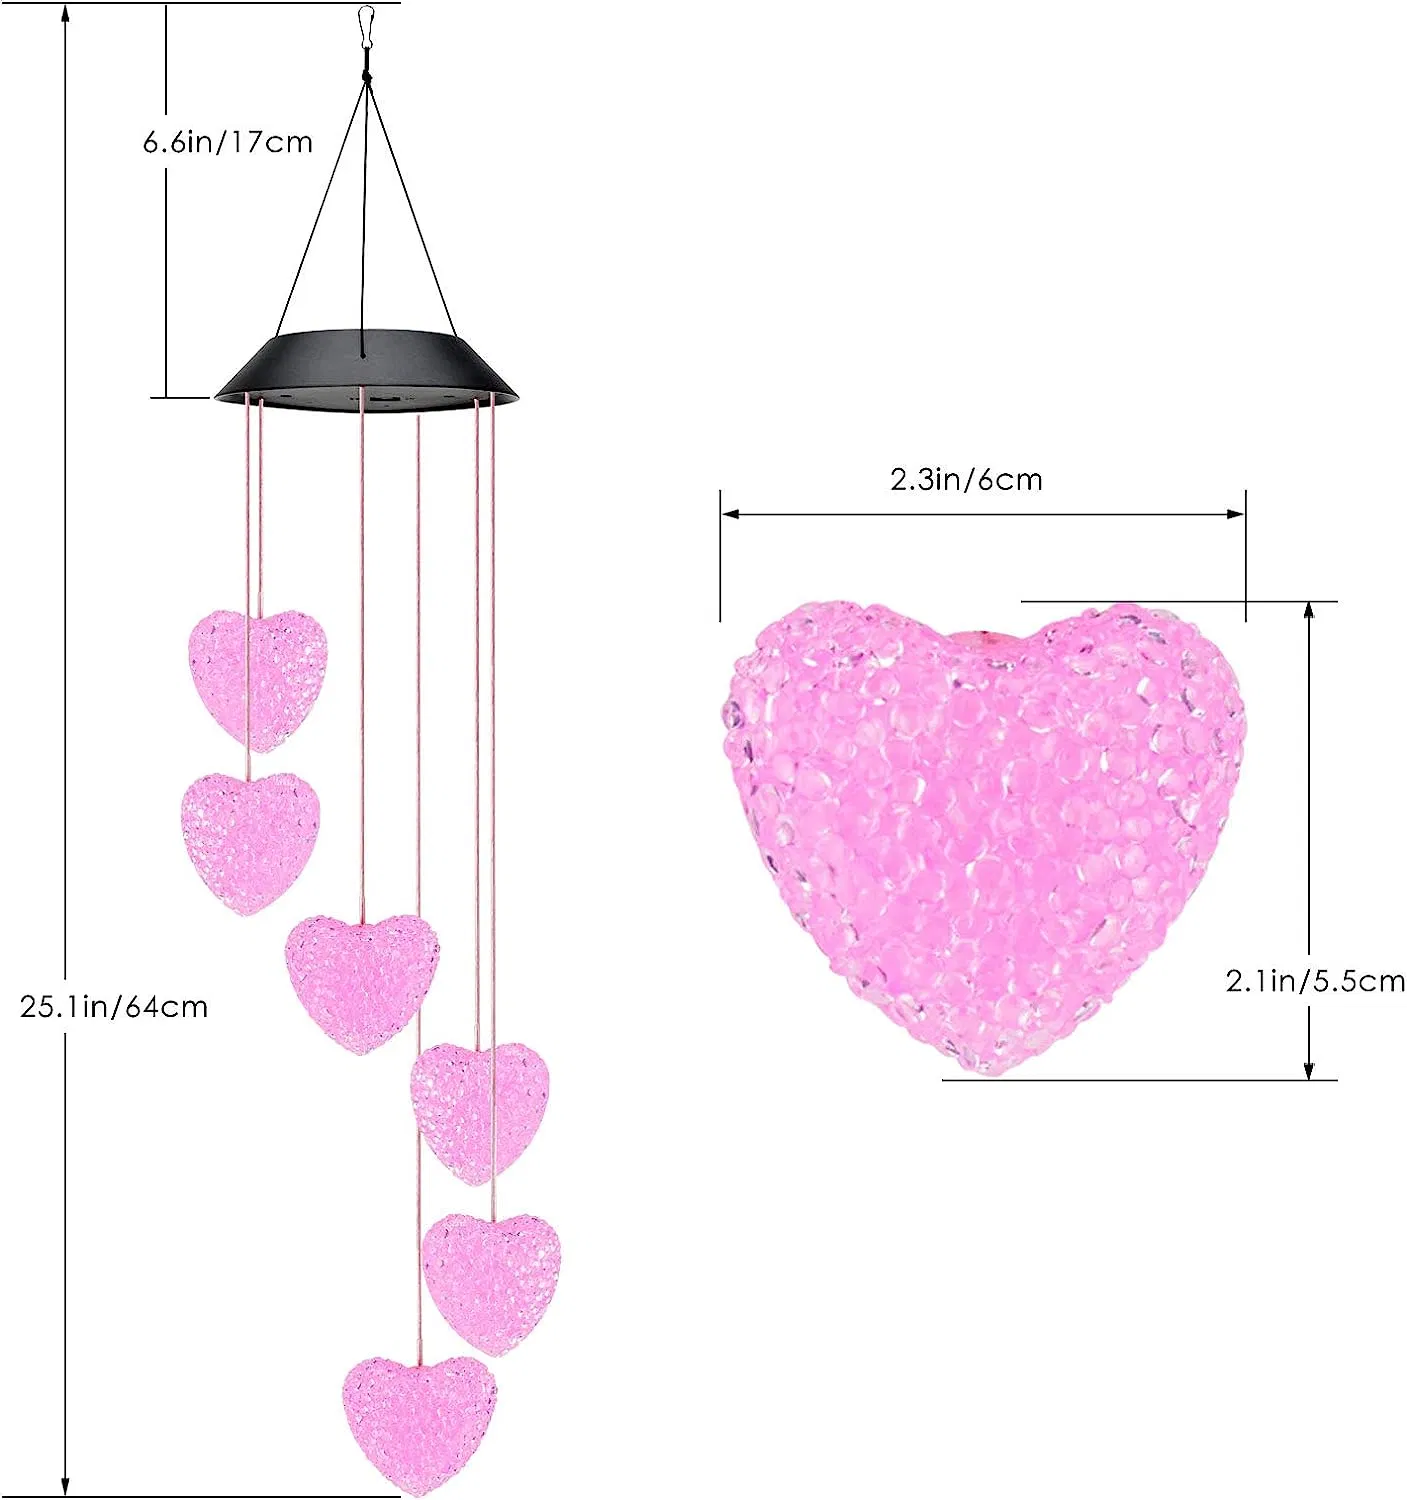 Heart Solar Wind Chimes Outdoor, LED Solar Wind Chimes Color Changing Mobile Wind Chime Waterproof Solar Lighs Home Decoration Gift